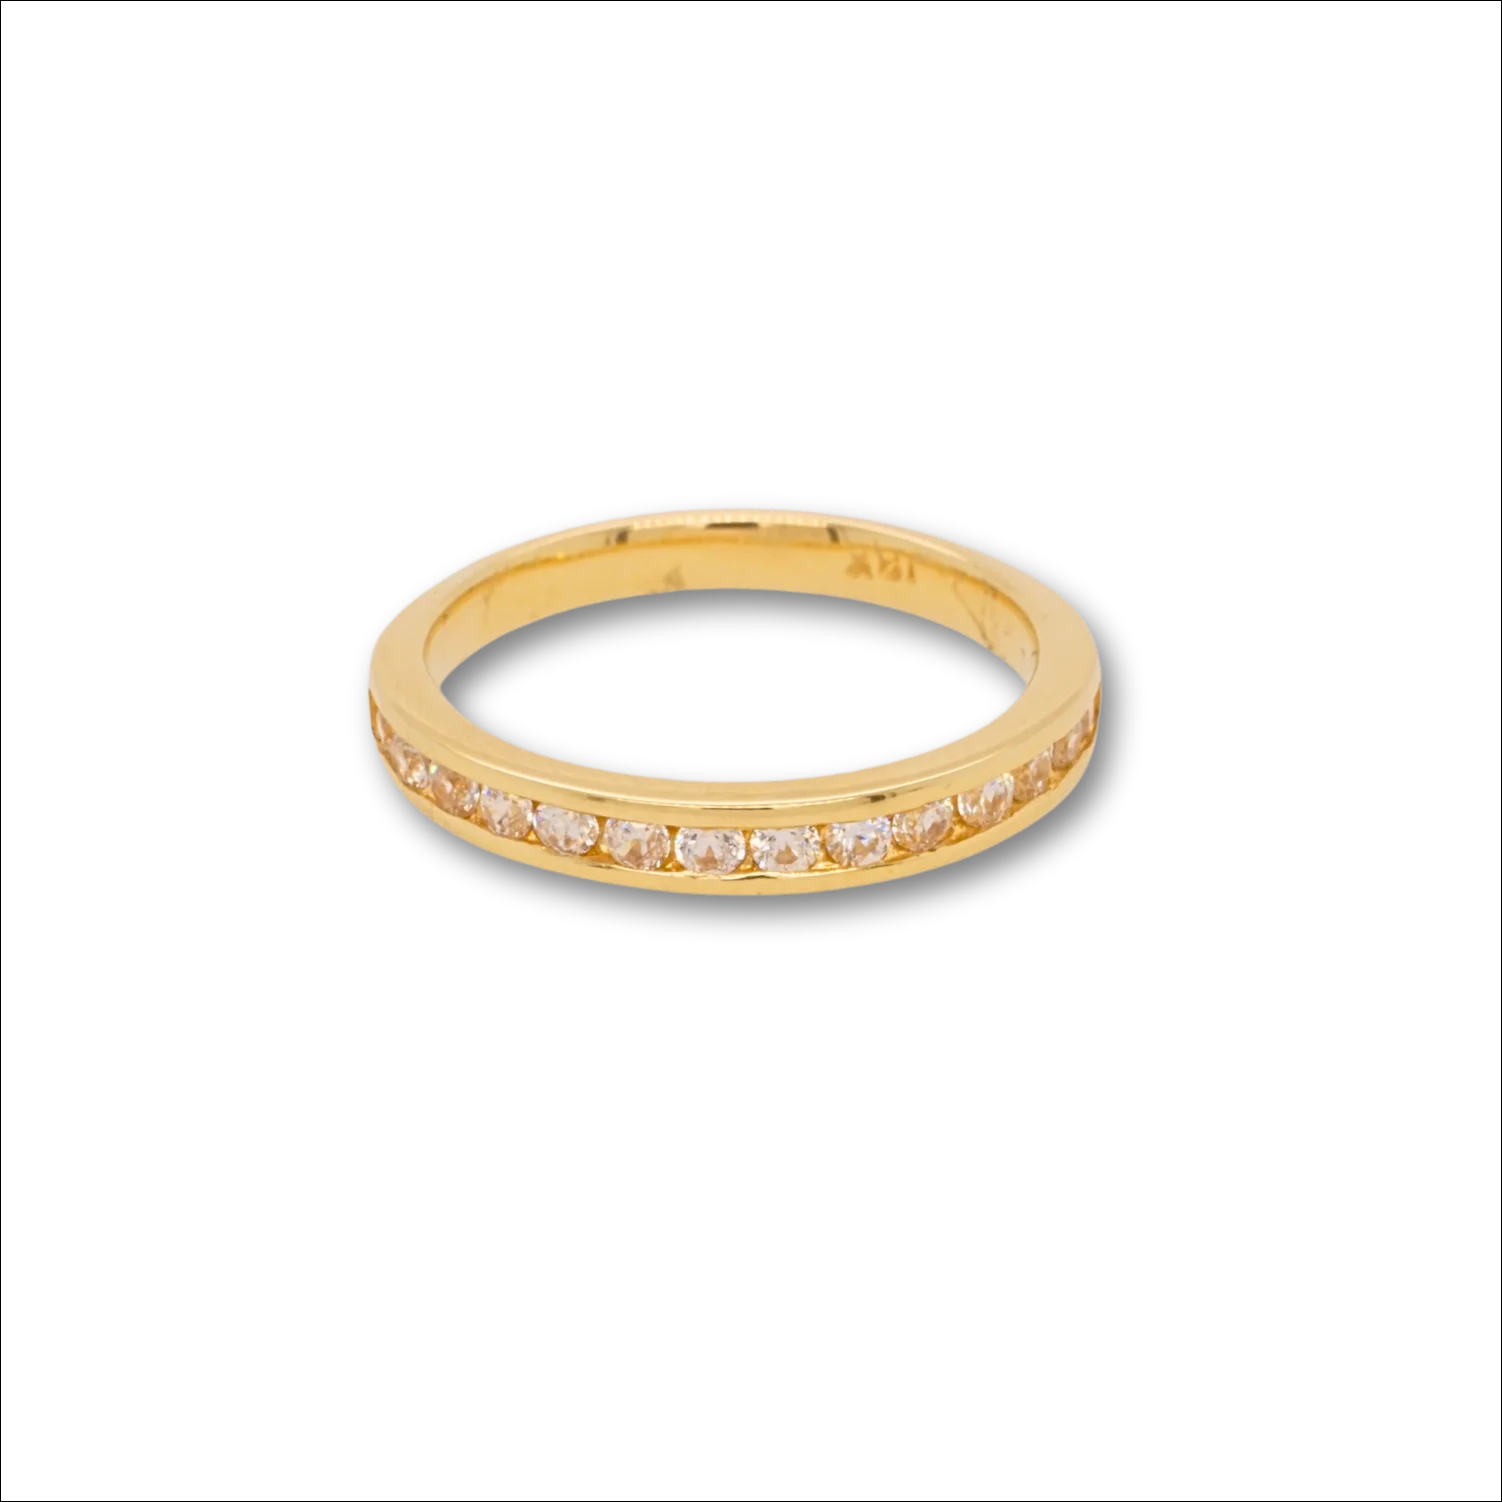 Essence of Radiance: The 18k Gold Ring Adorned with CZ